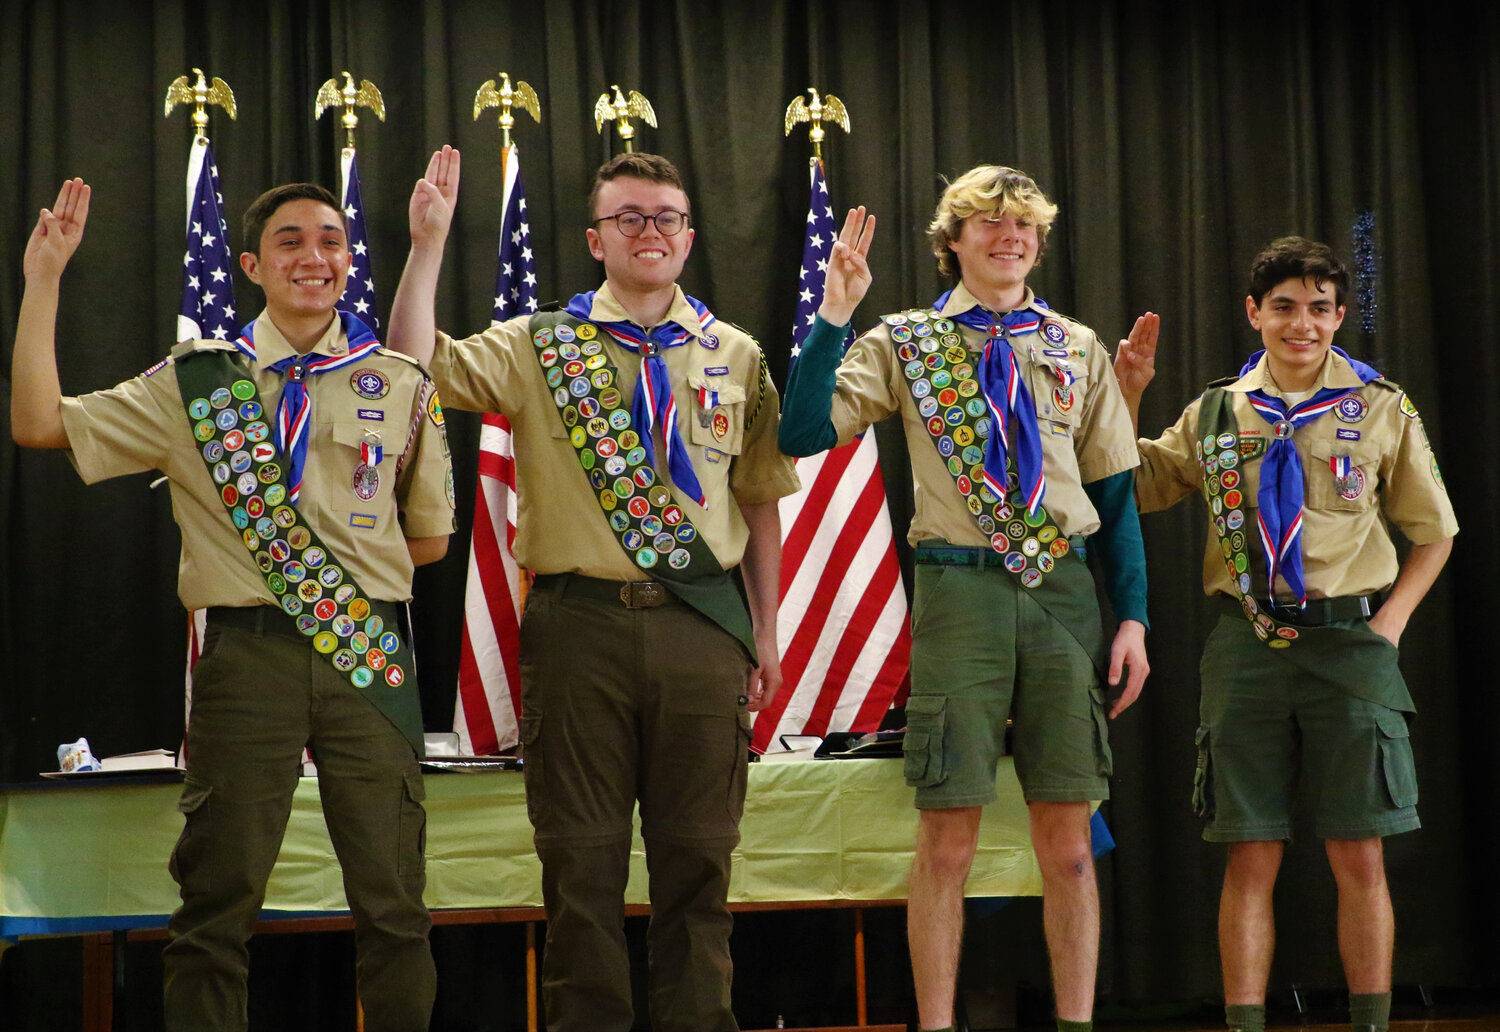 Newly-minted Eagle Scouts Andrew Schiller, left, Ethan Palacio, Robert Munafo, and Lucas Colonna.